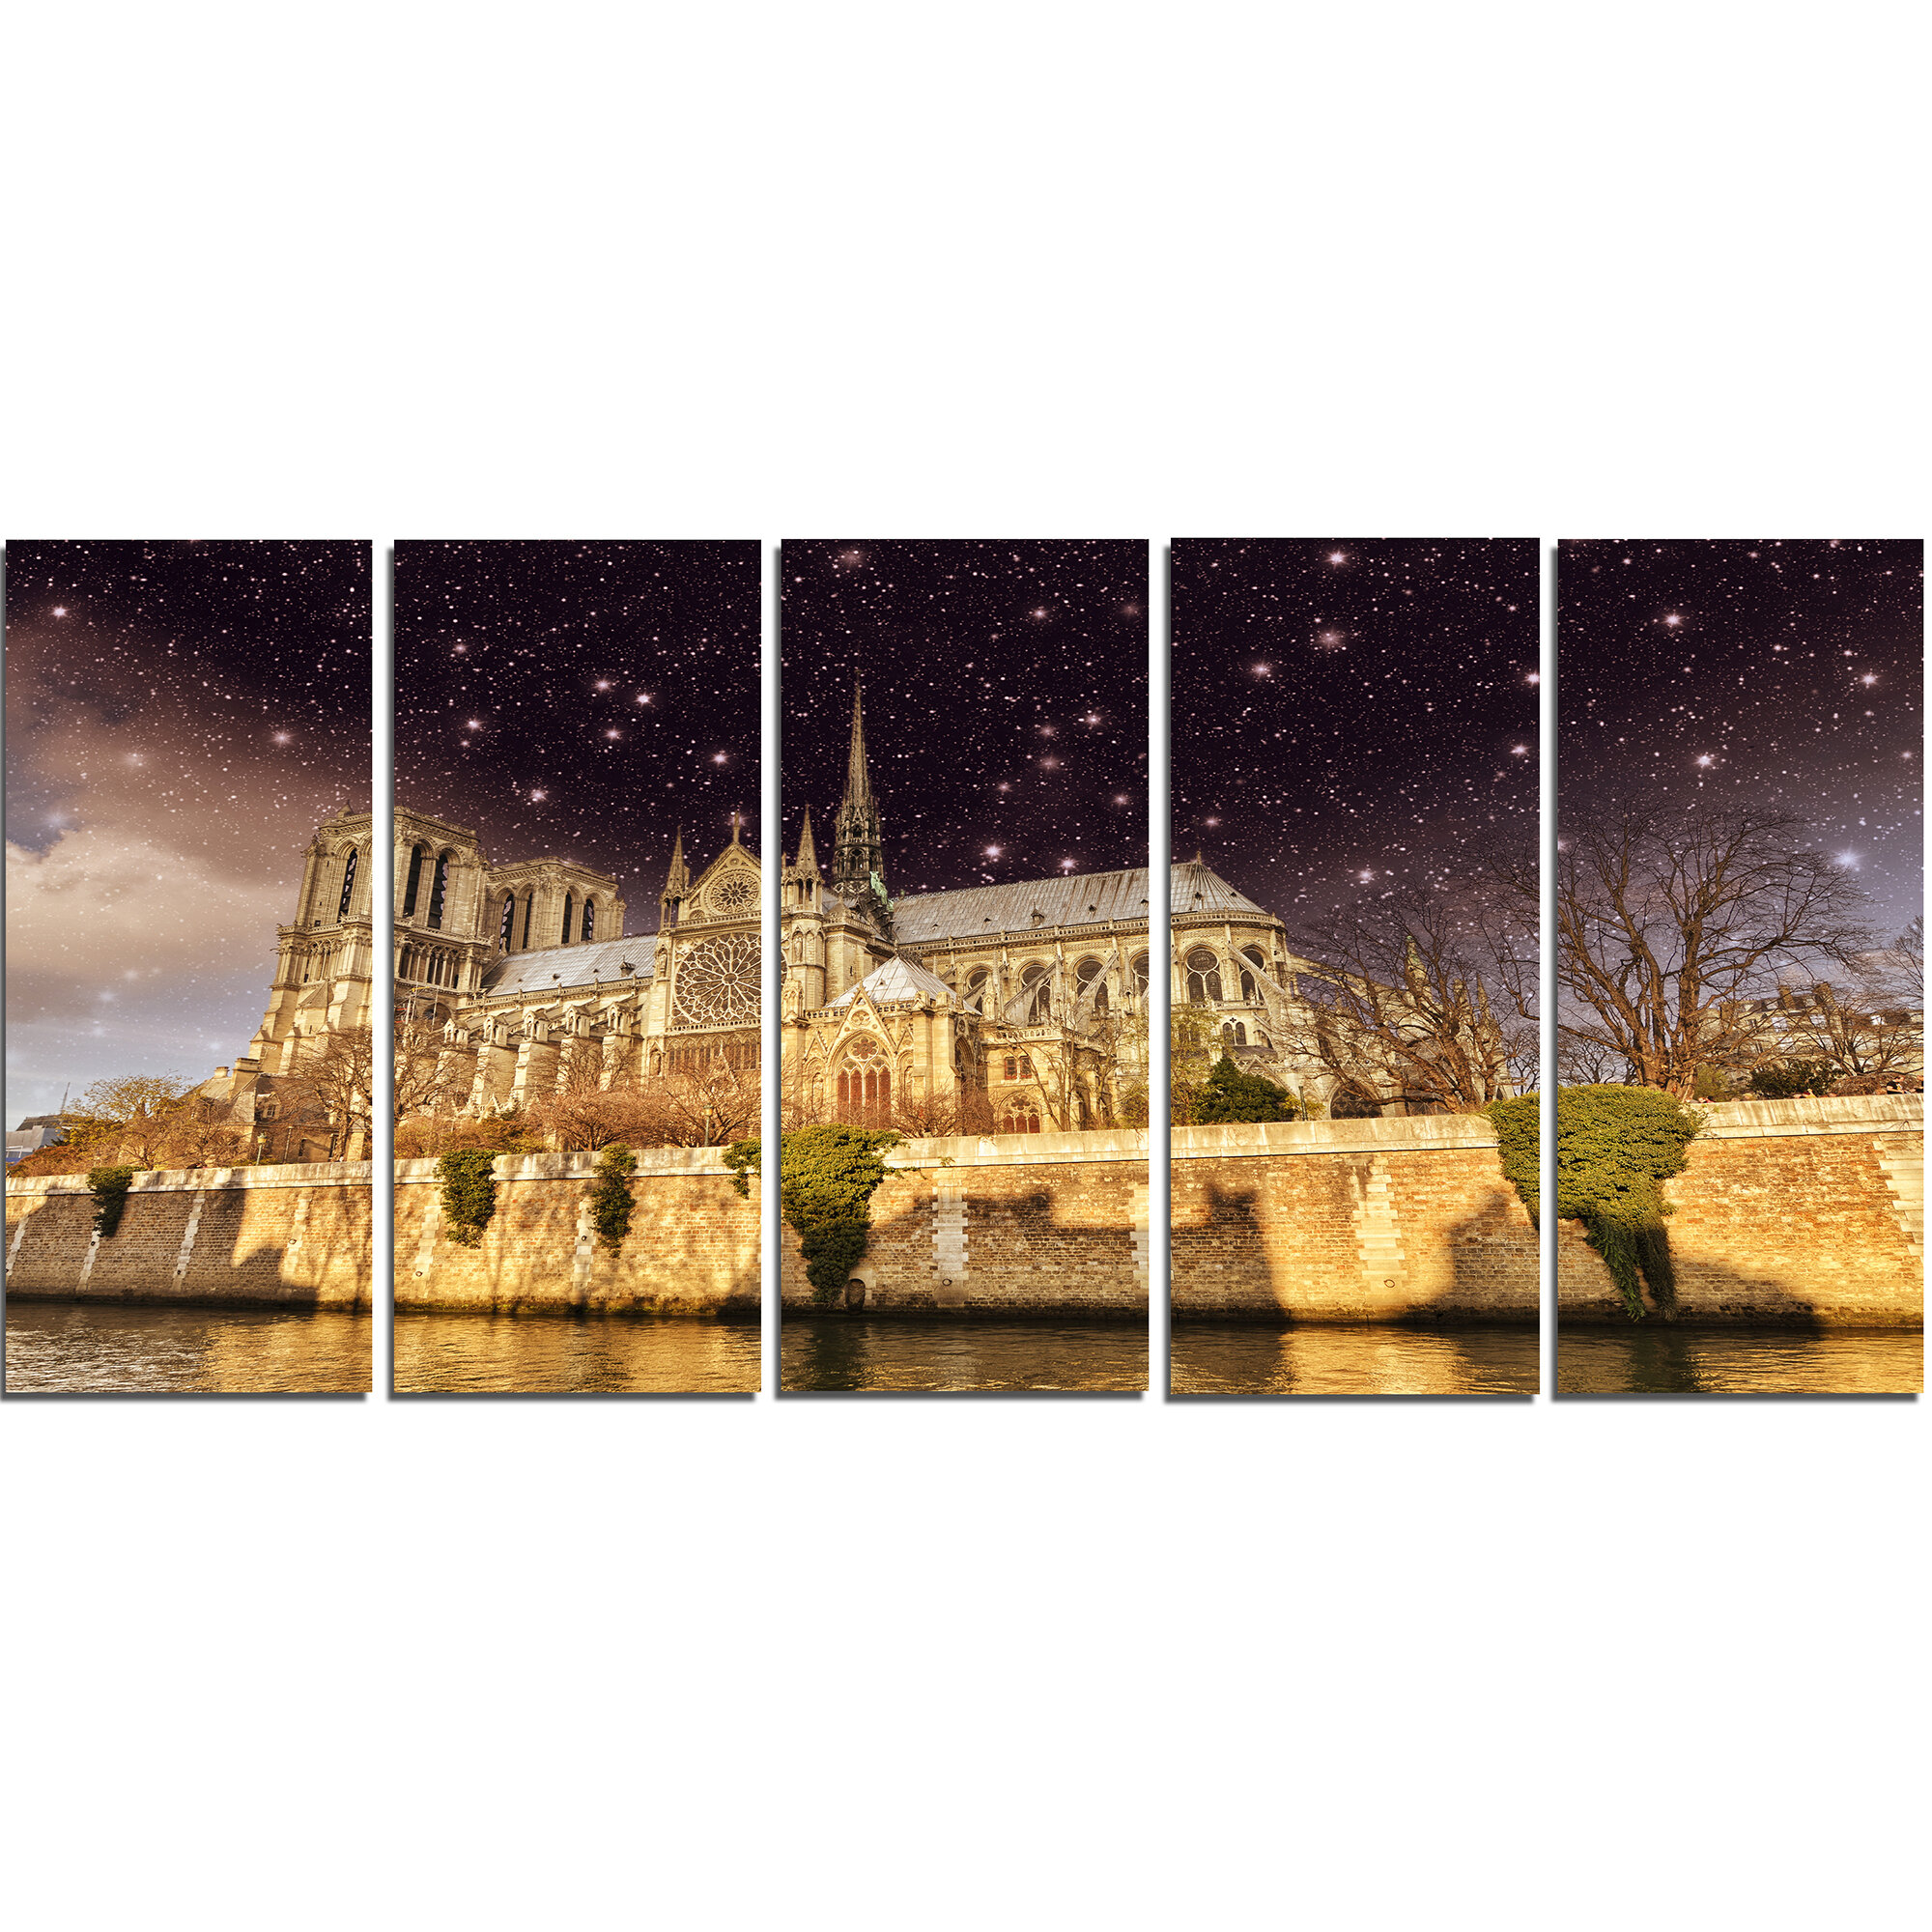 Designart Notre Dame Cathedral At Night 5 Piece Wall Art On Wrapped Canvas Set Wayfair